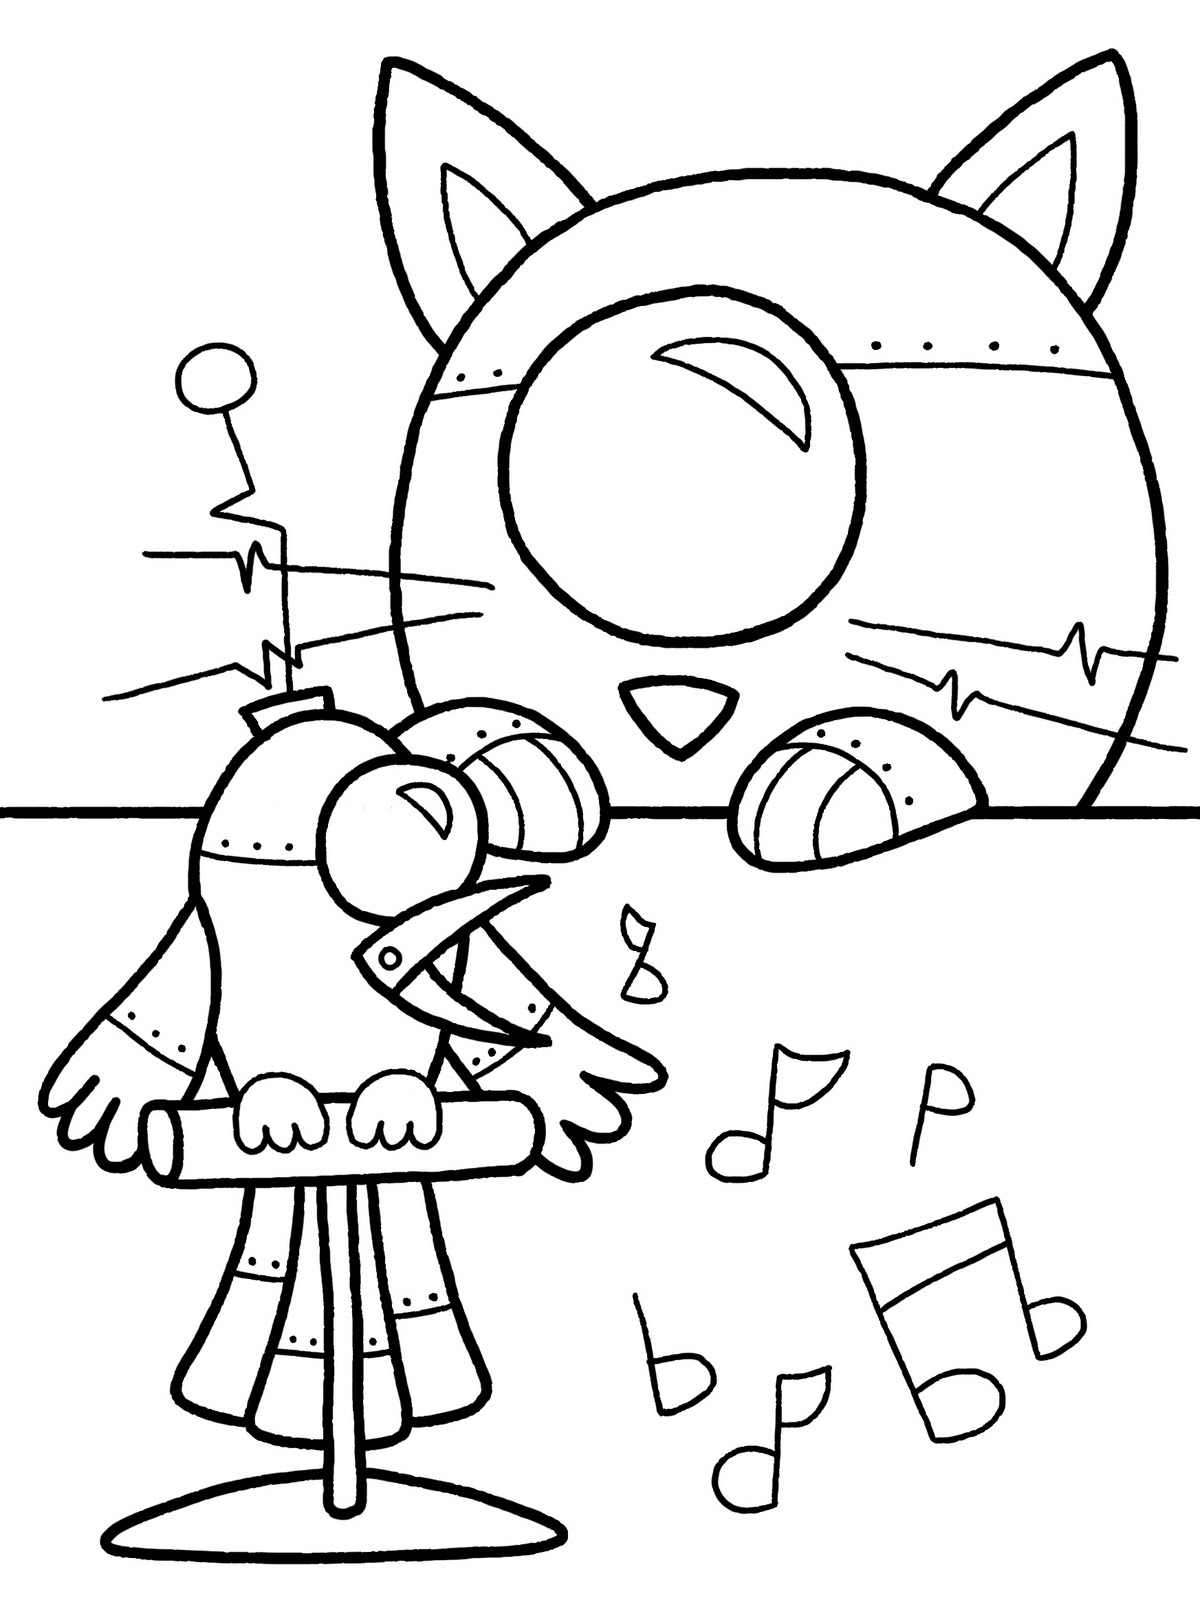 more robot coloring pages. can i get this one to do MY